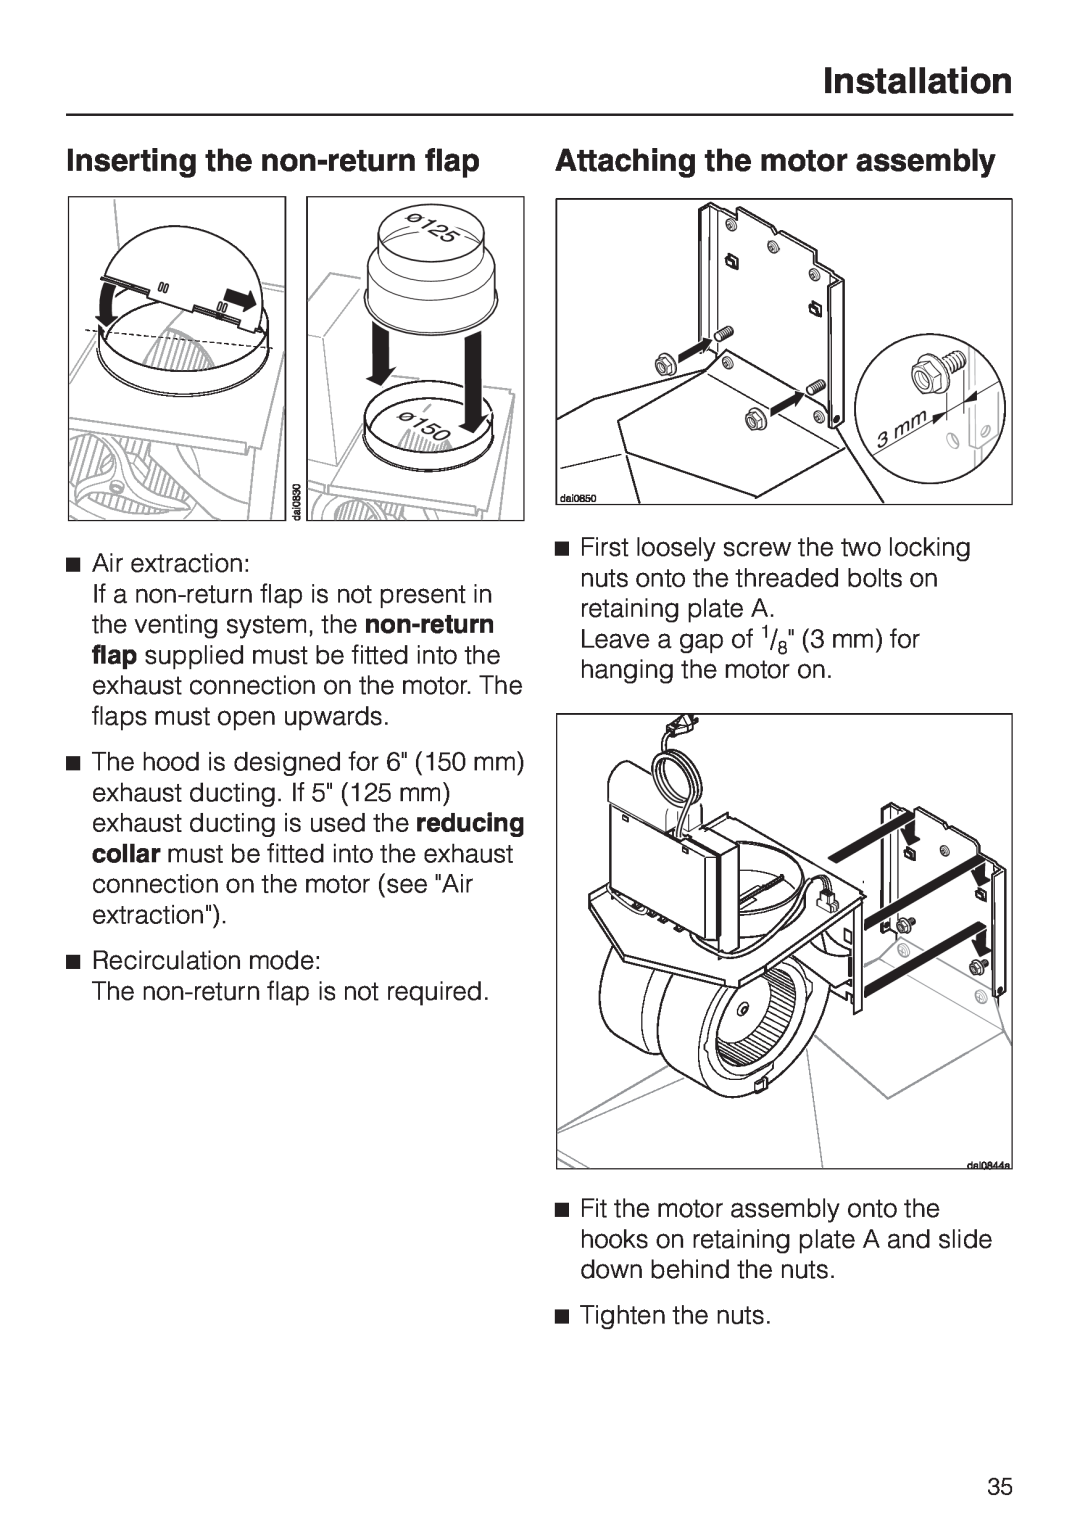 Miele DA 219-3, DA217-3 installation instructions Inserting the non-returnflap, Attaching the motor assembly, Installation 